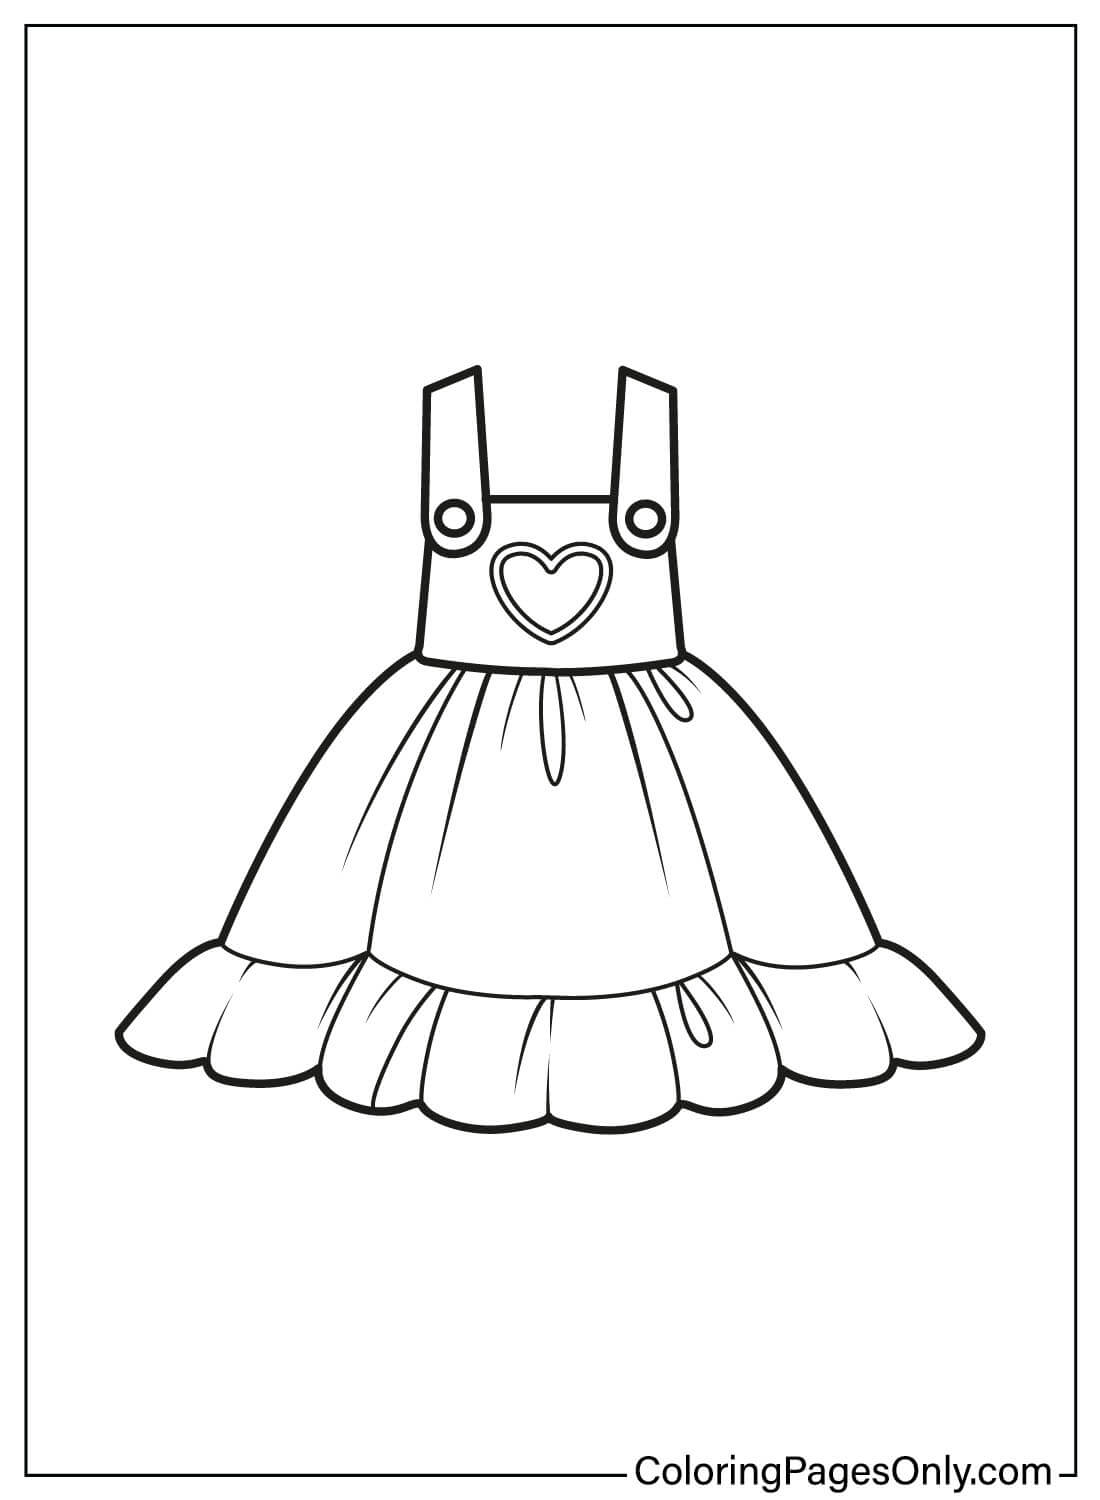 Baby Clothes Coloring Page Free - Free Printable Coloring Pages